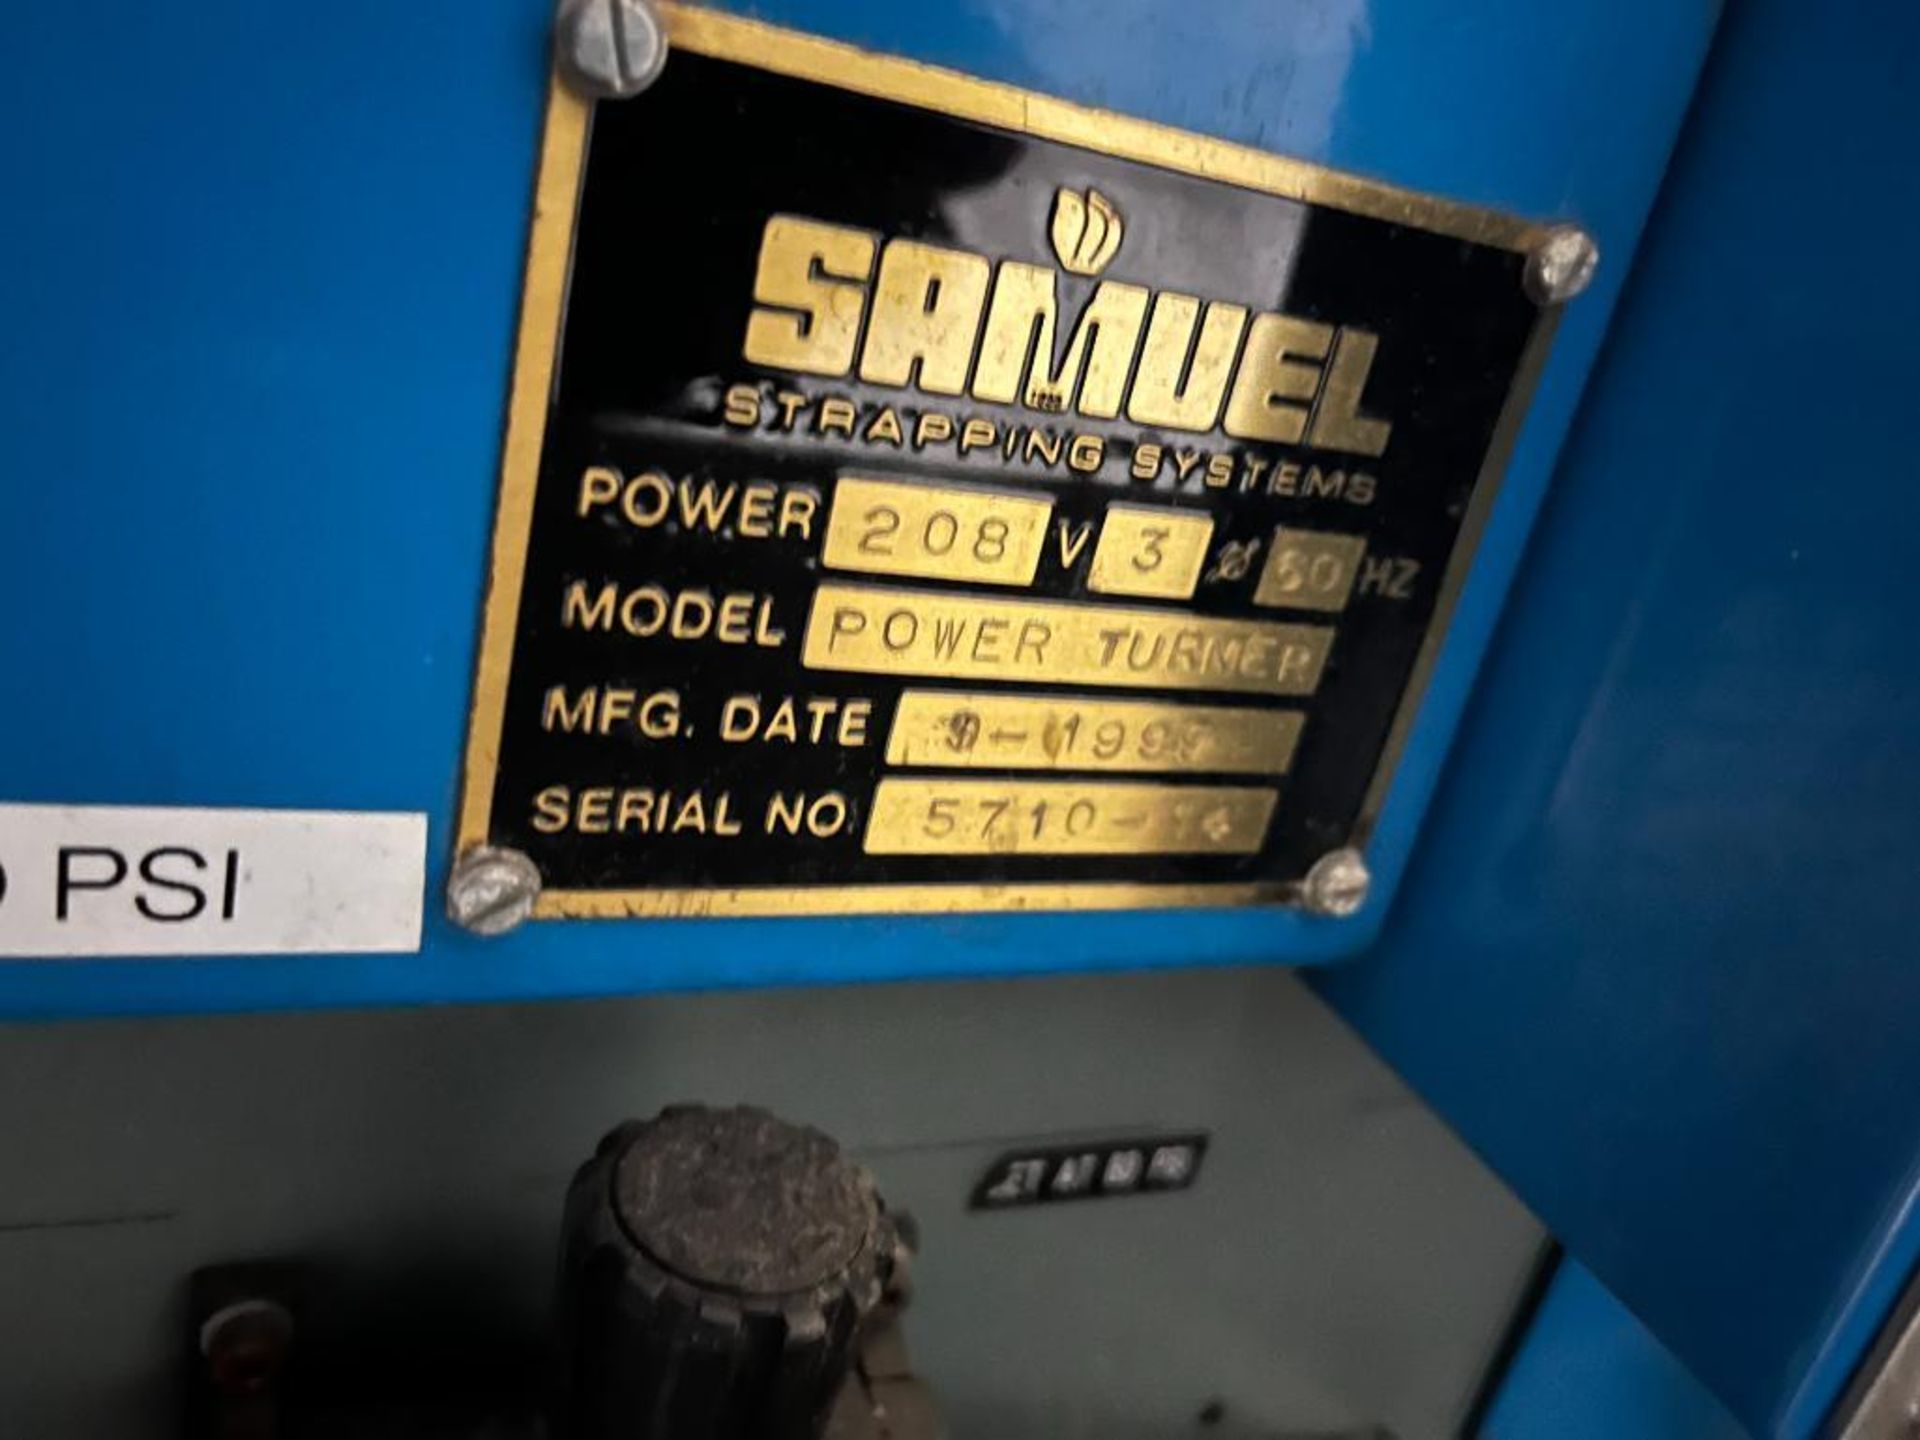 Samuel Strapping Systems Power Turner, S/N 5710-14 (1999) - Image 4 of 4